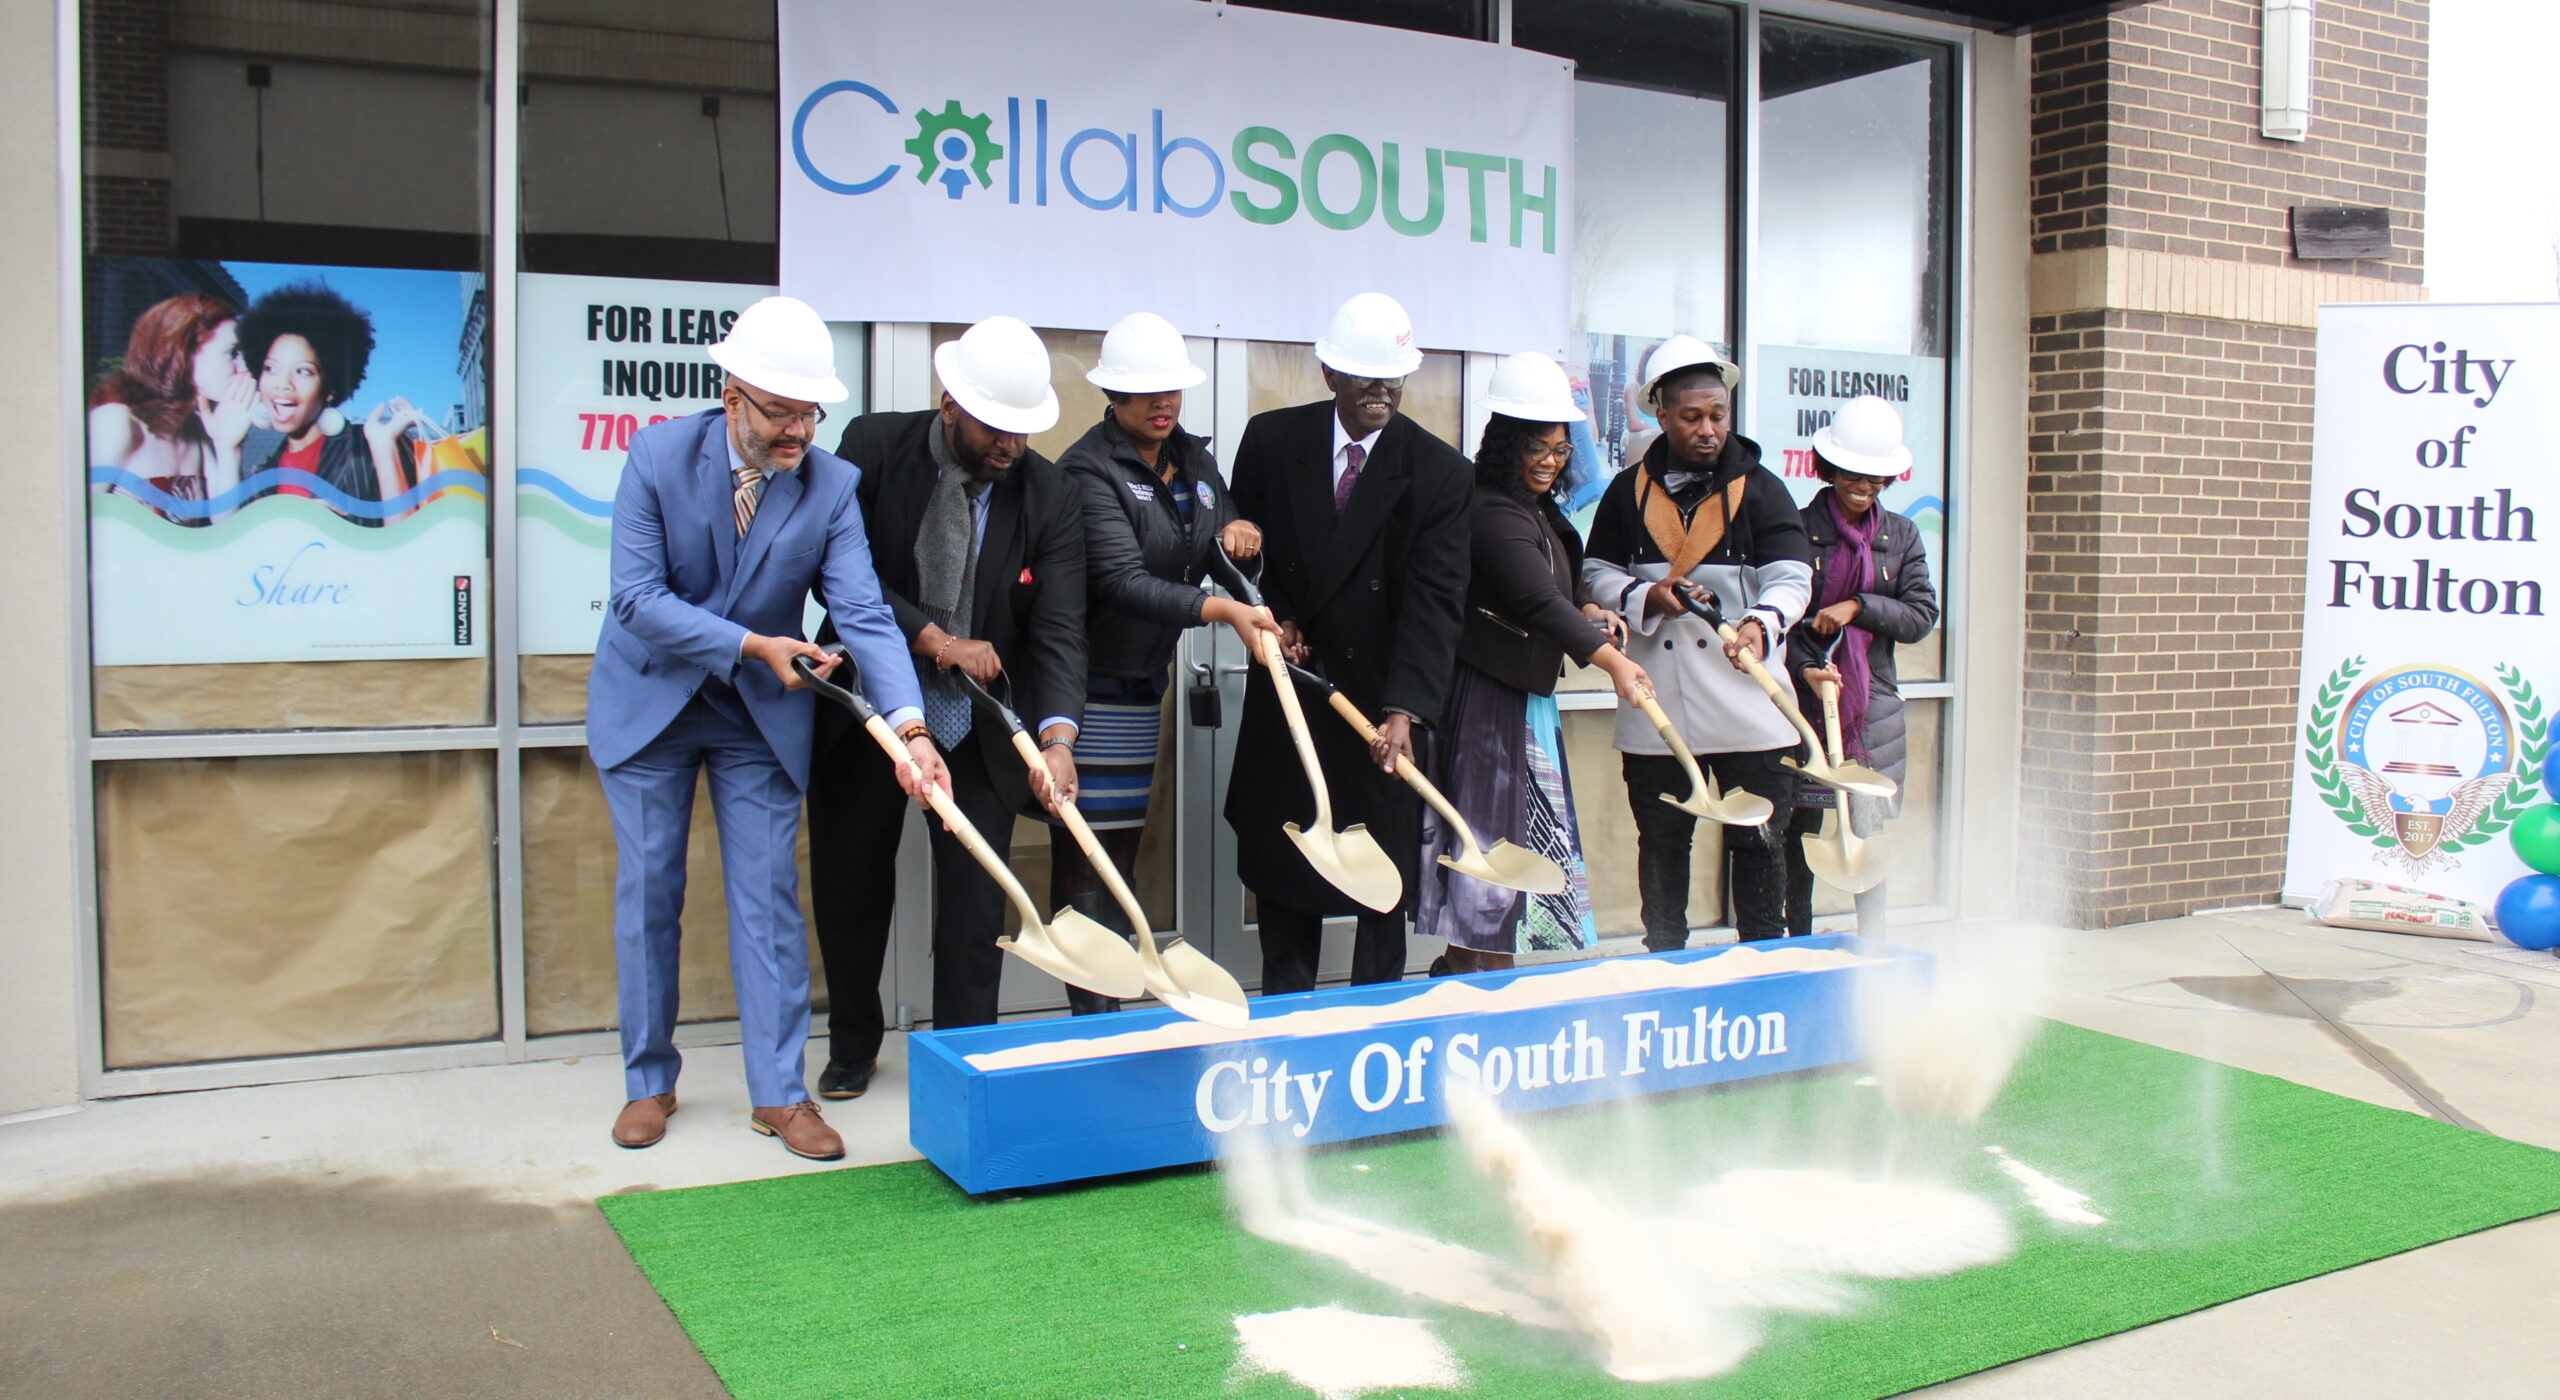 City to Celebrate Grand Opening of Second CollabSOUTH Location